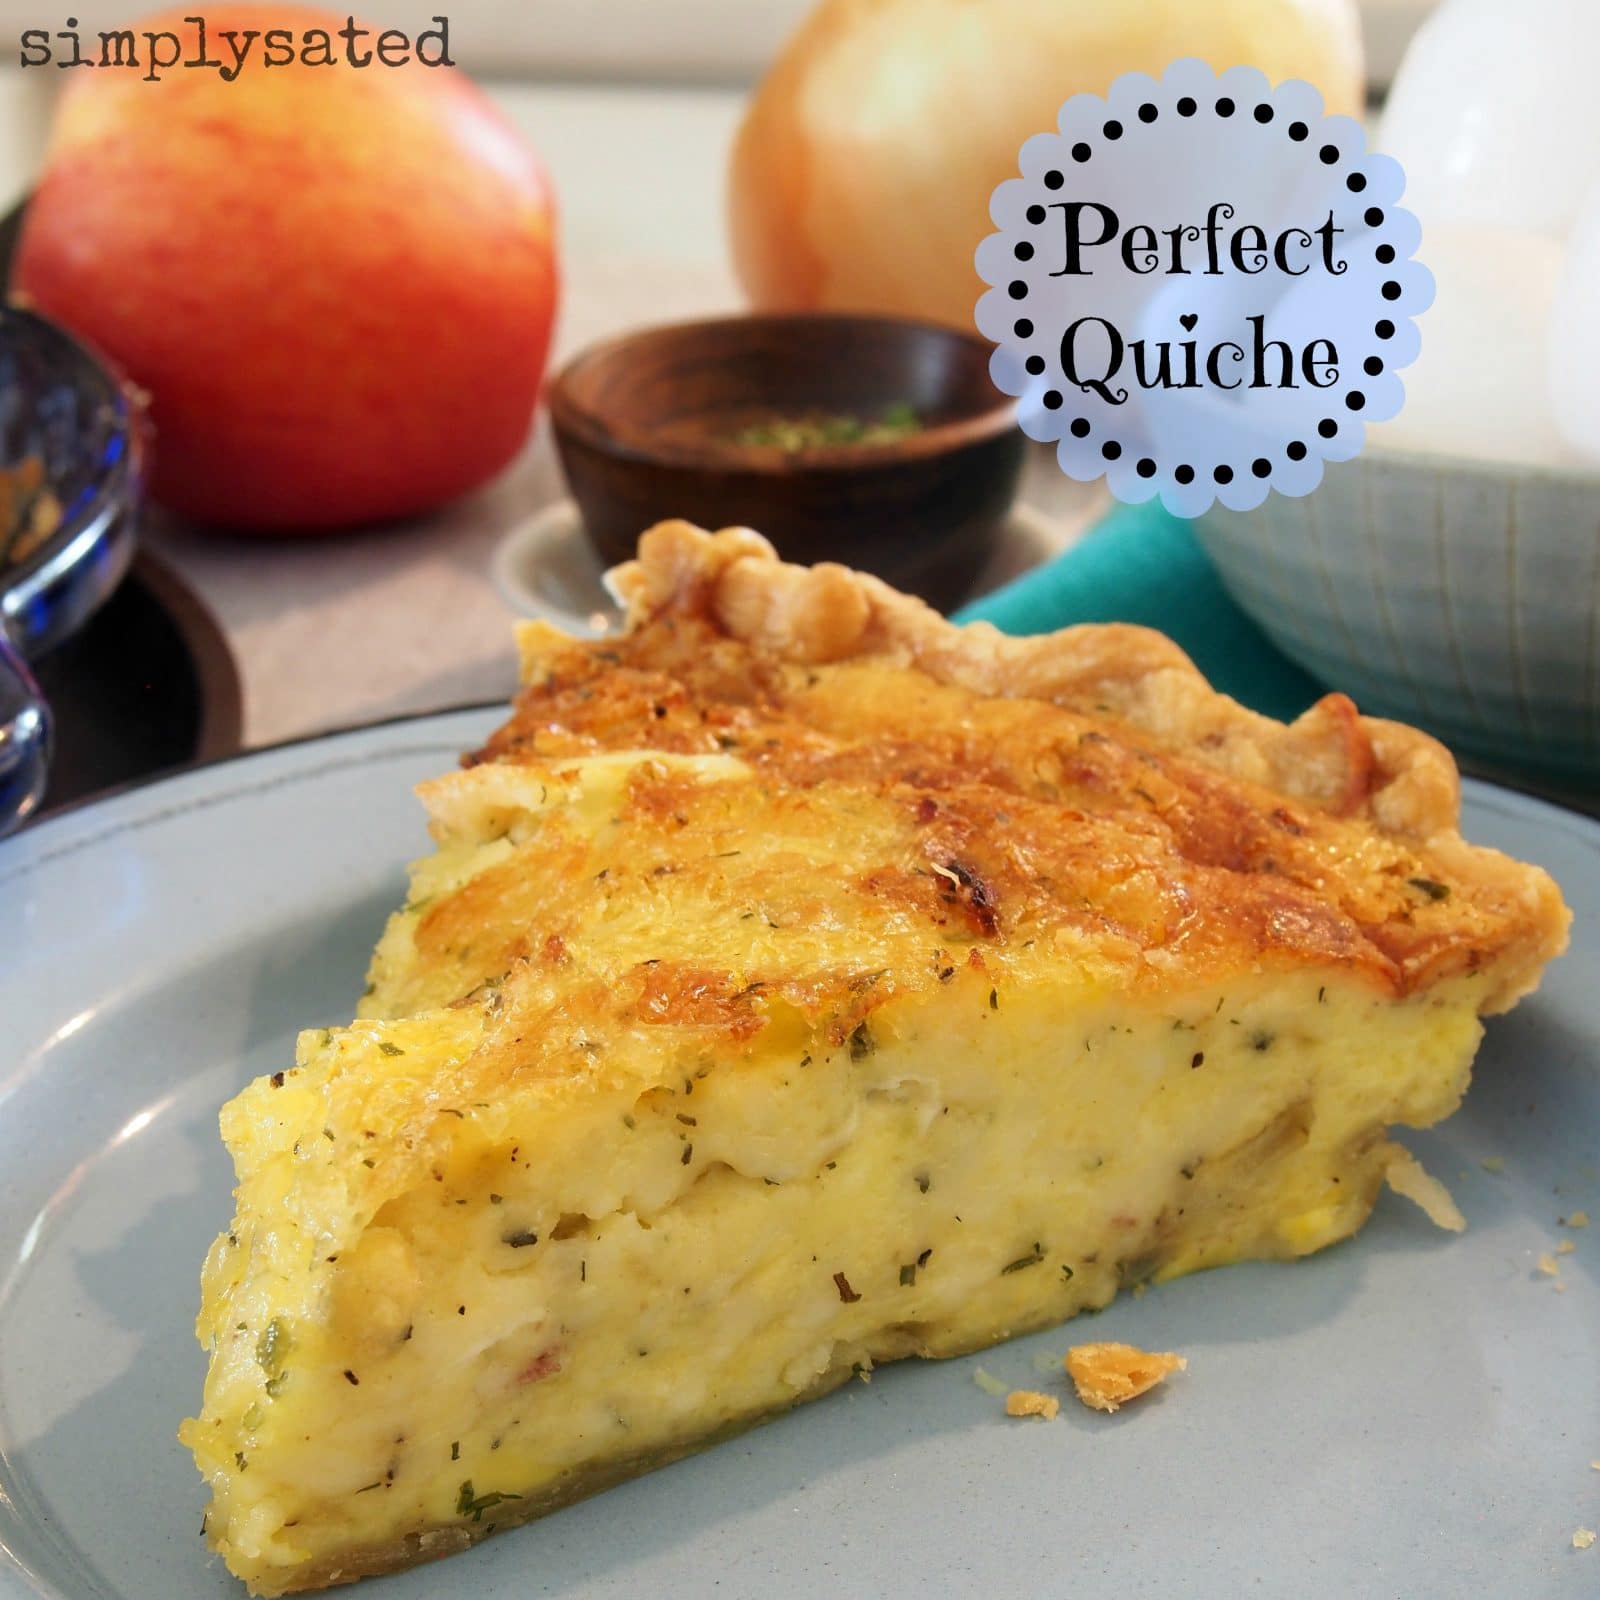 Perfect Quiche has the perfect texture, flavor combination, seasoning and it is gorgeous. It is versatile and the perfect meal anytime of the day.